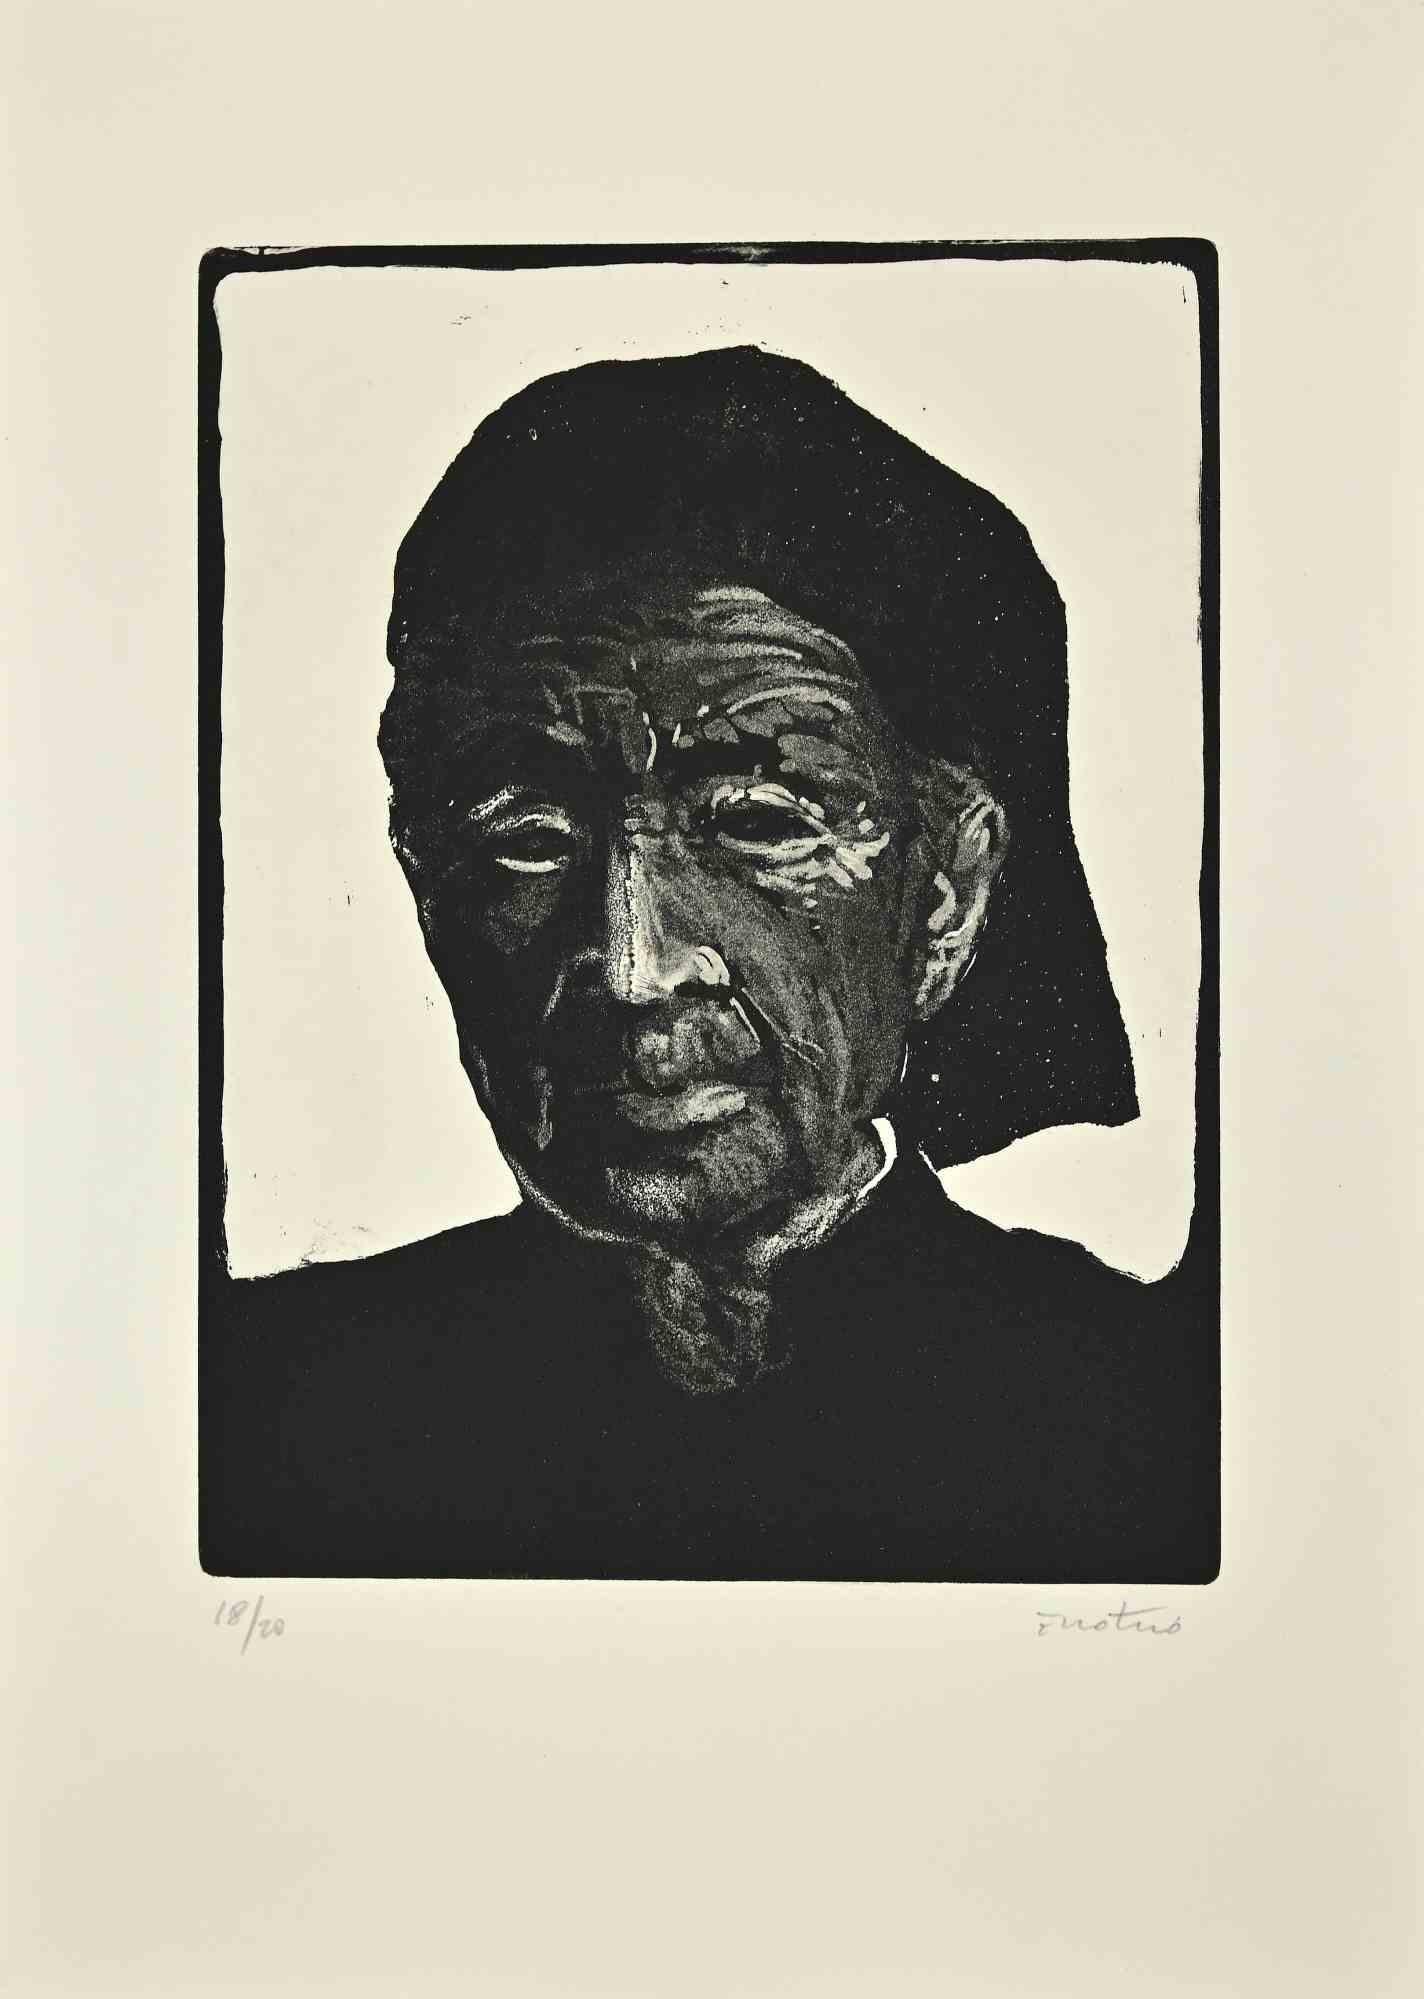 Portrait of Old Woman is an Etching realized by Enotrio Pugliese in 1970s.

Limited edition of 20 copies numbered and signed by the artist.

Good conditions.

Enotrio Pugliese (May 11, 1920 - August 1989) was an Italian painter. Born in Buenos Aires